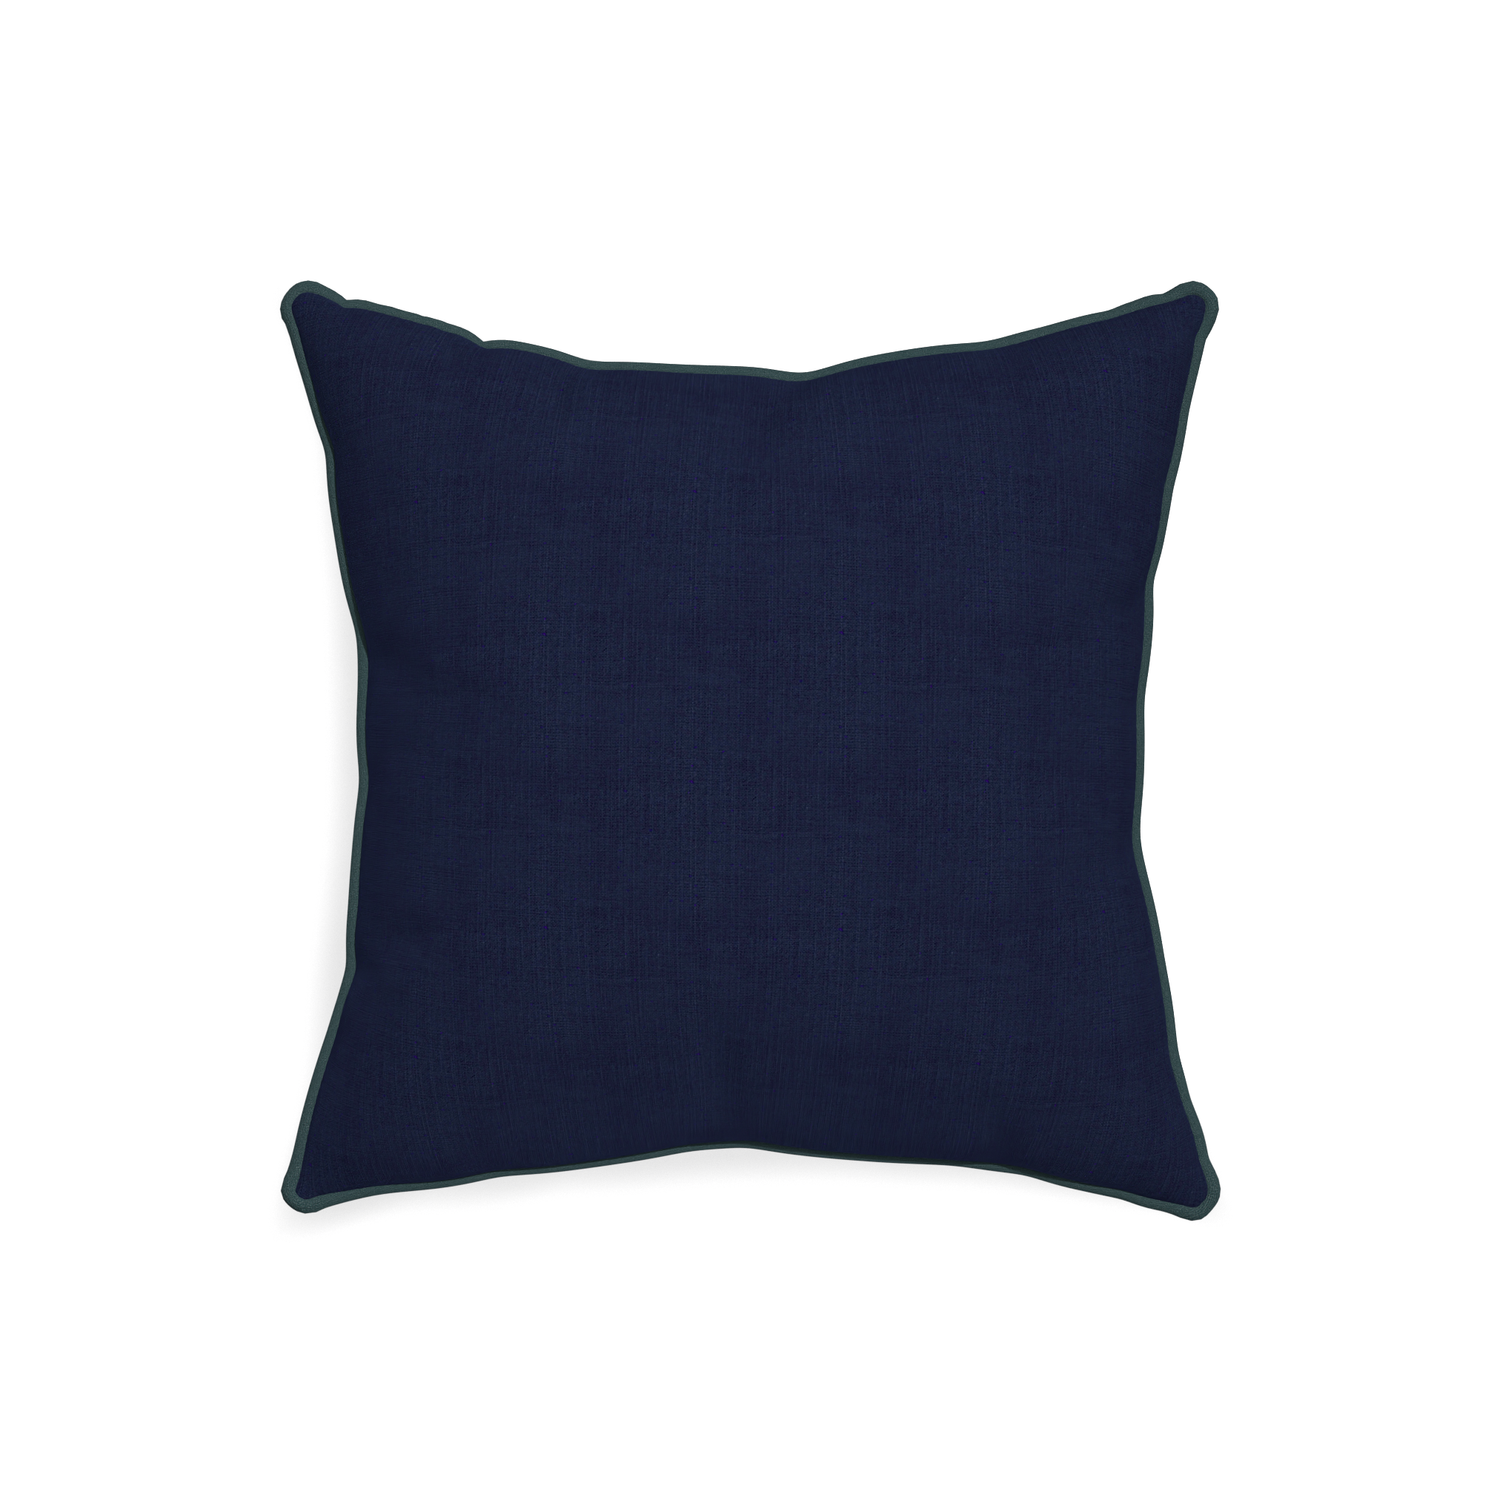 20-square midnight custom navy bluepillow with p piping on white background